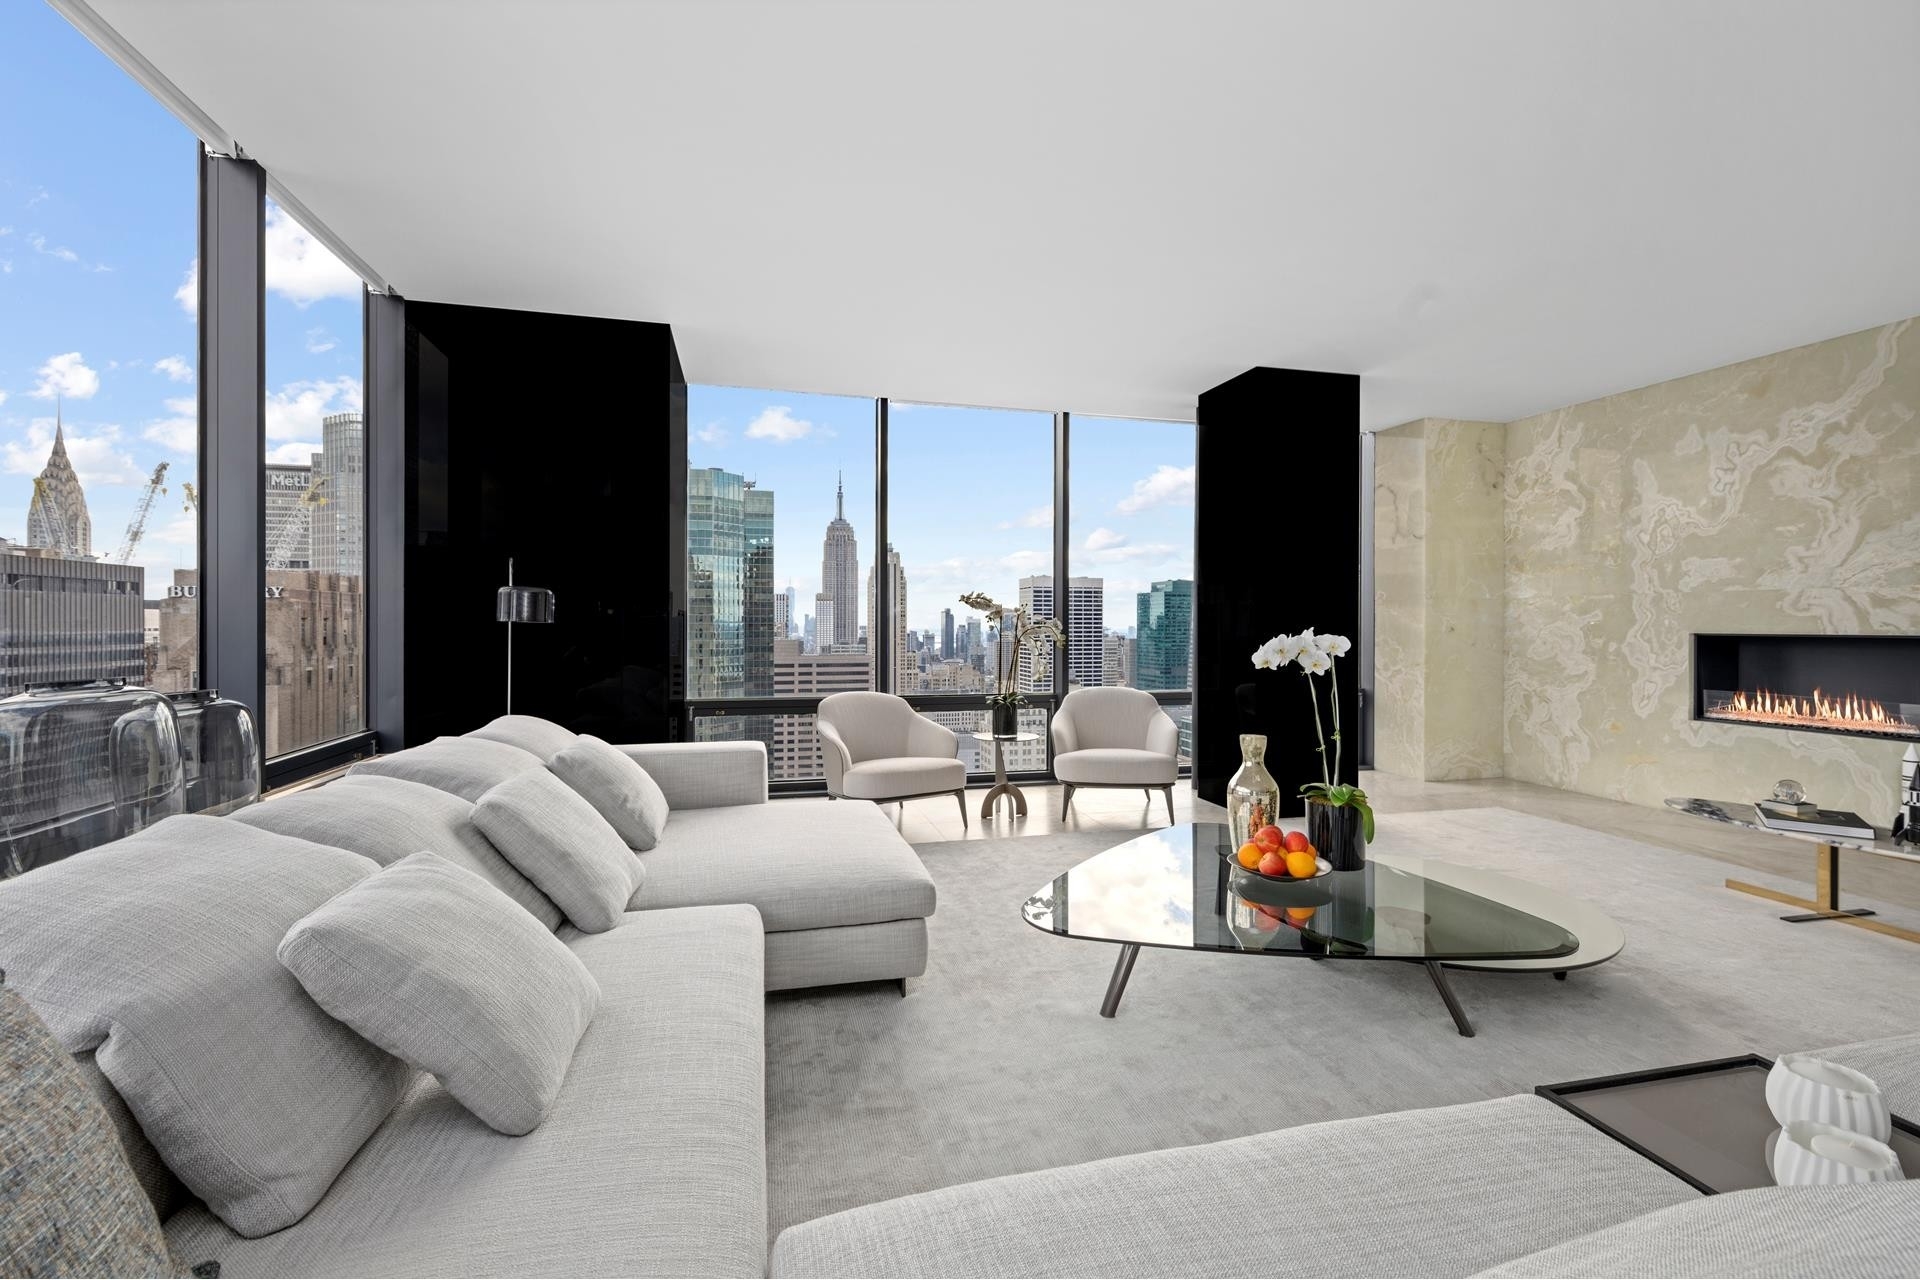 Property at Olympic Tower, 641 FIFTH AVE, 42DE Midtown East, New York, NY 10022